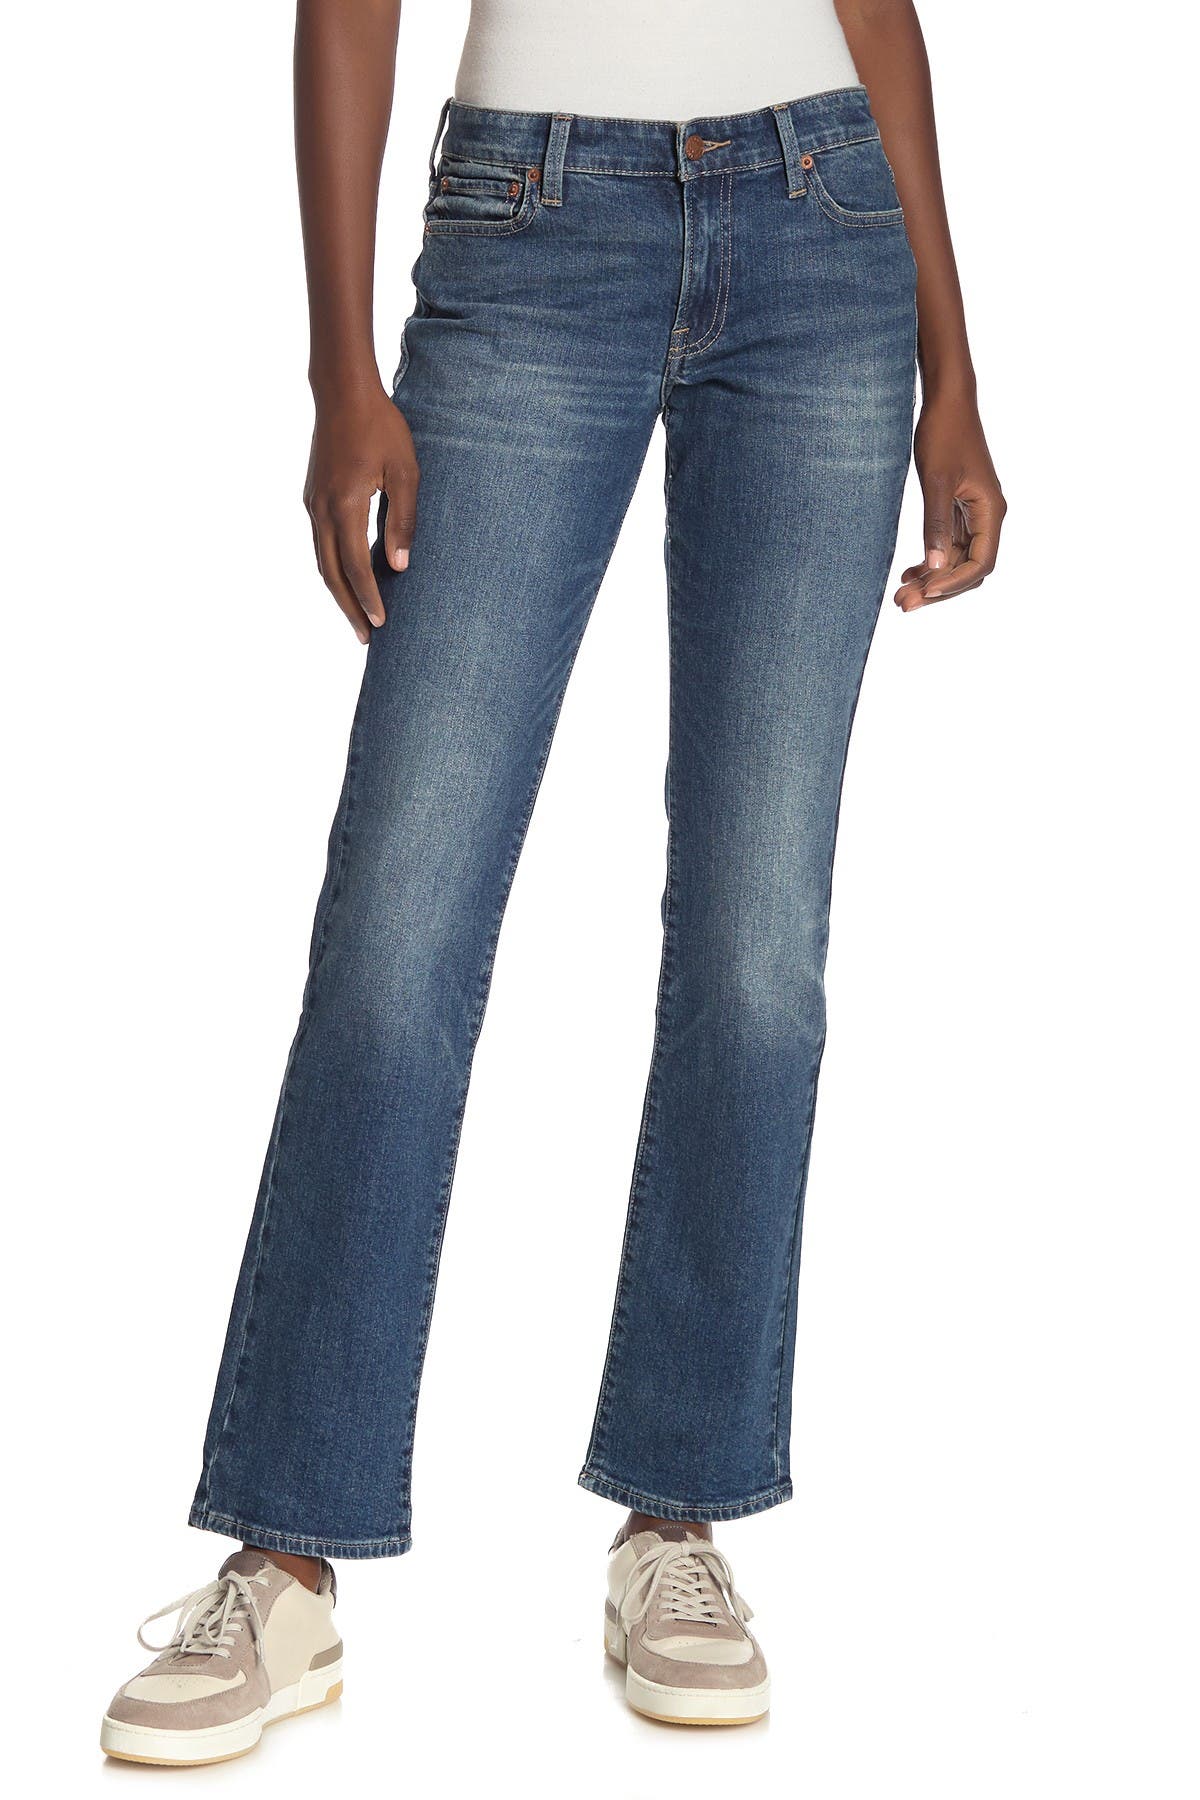 lucky brand sweet n straight jeans